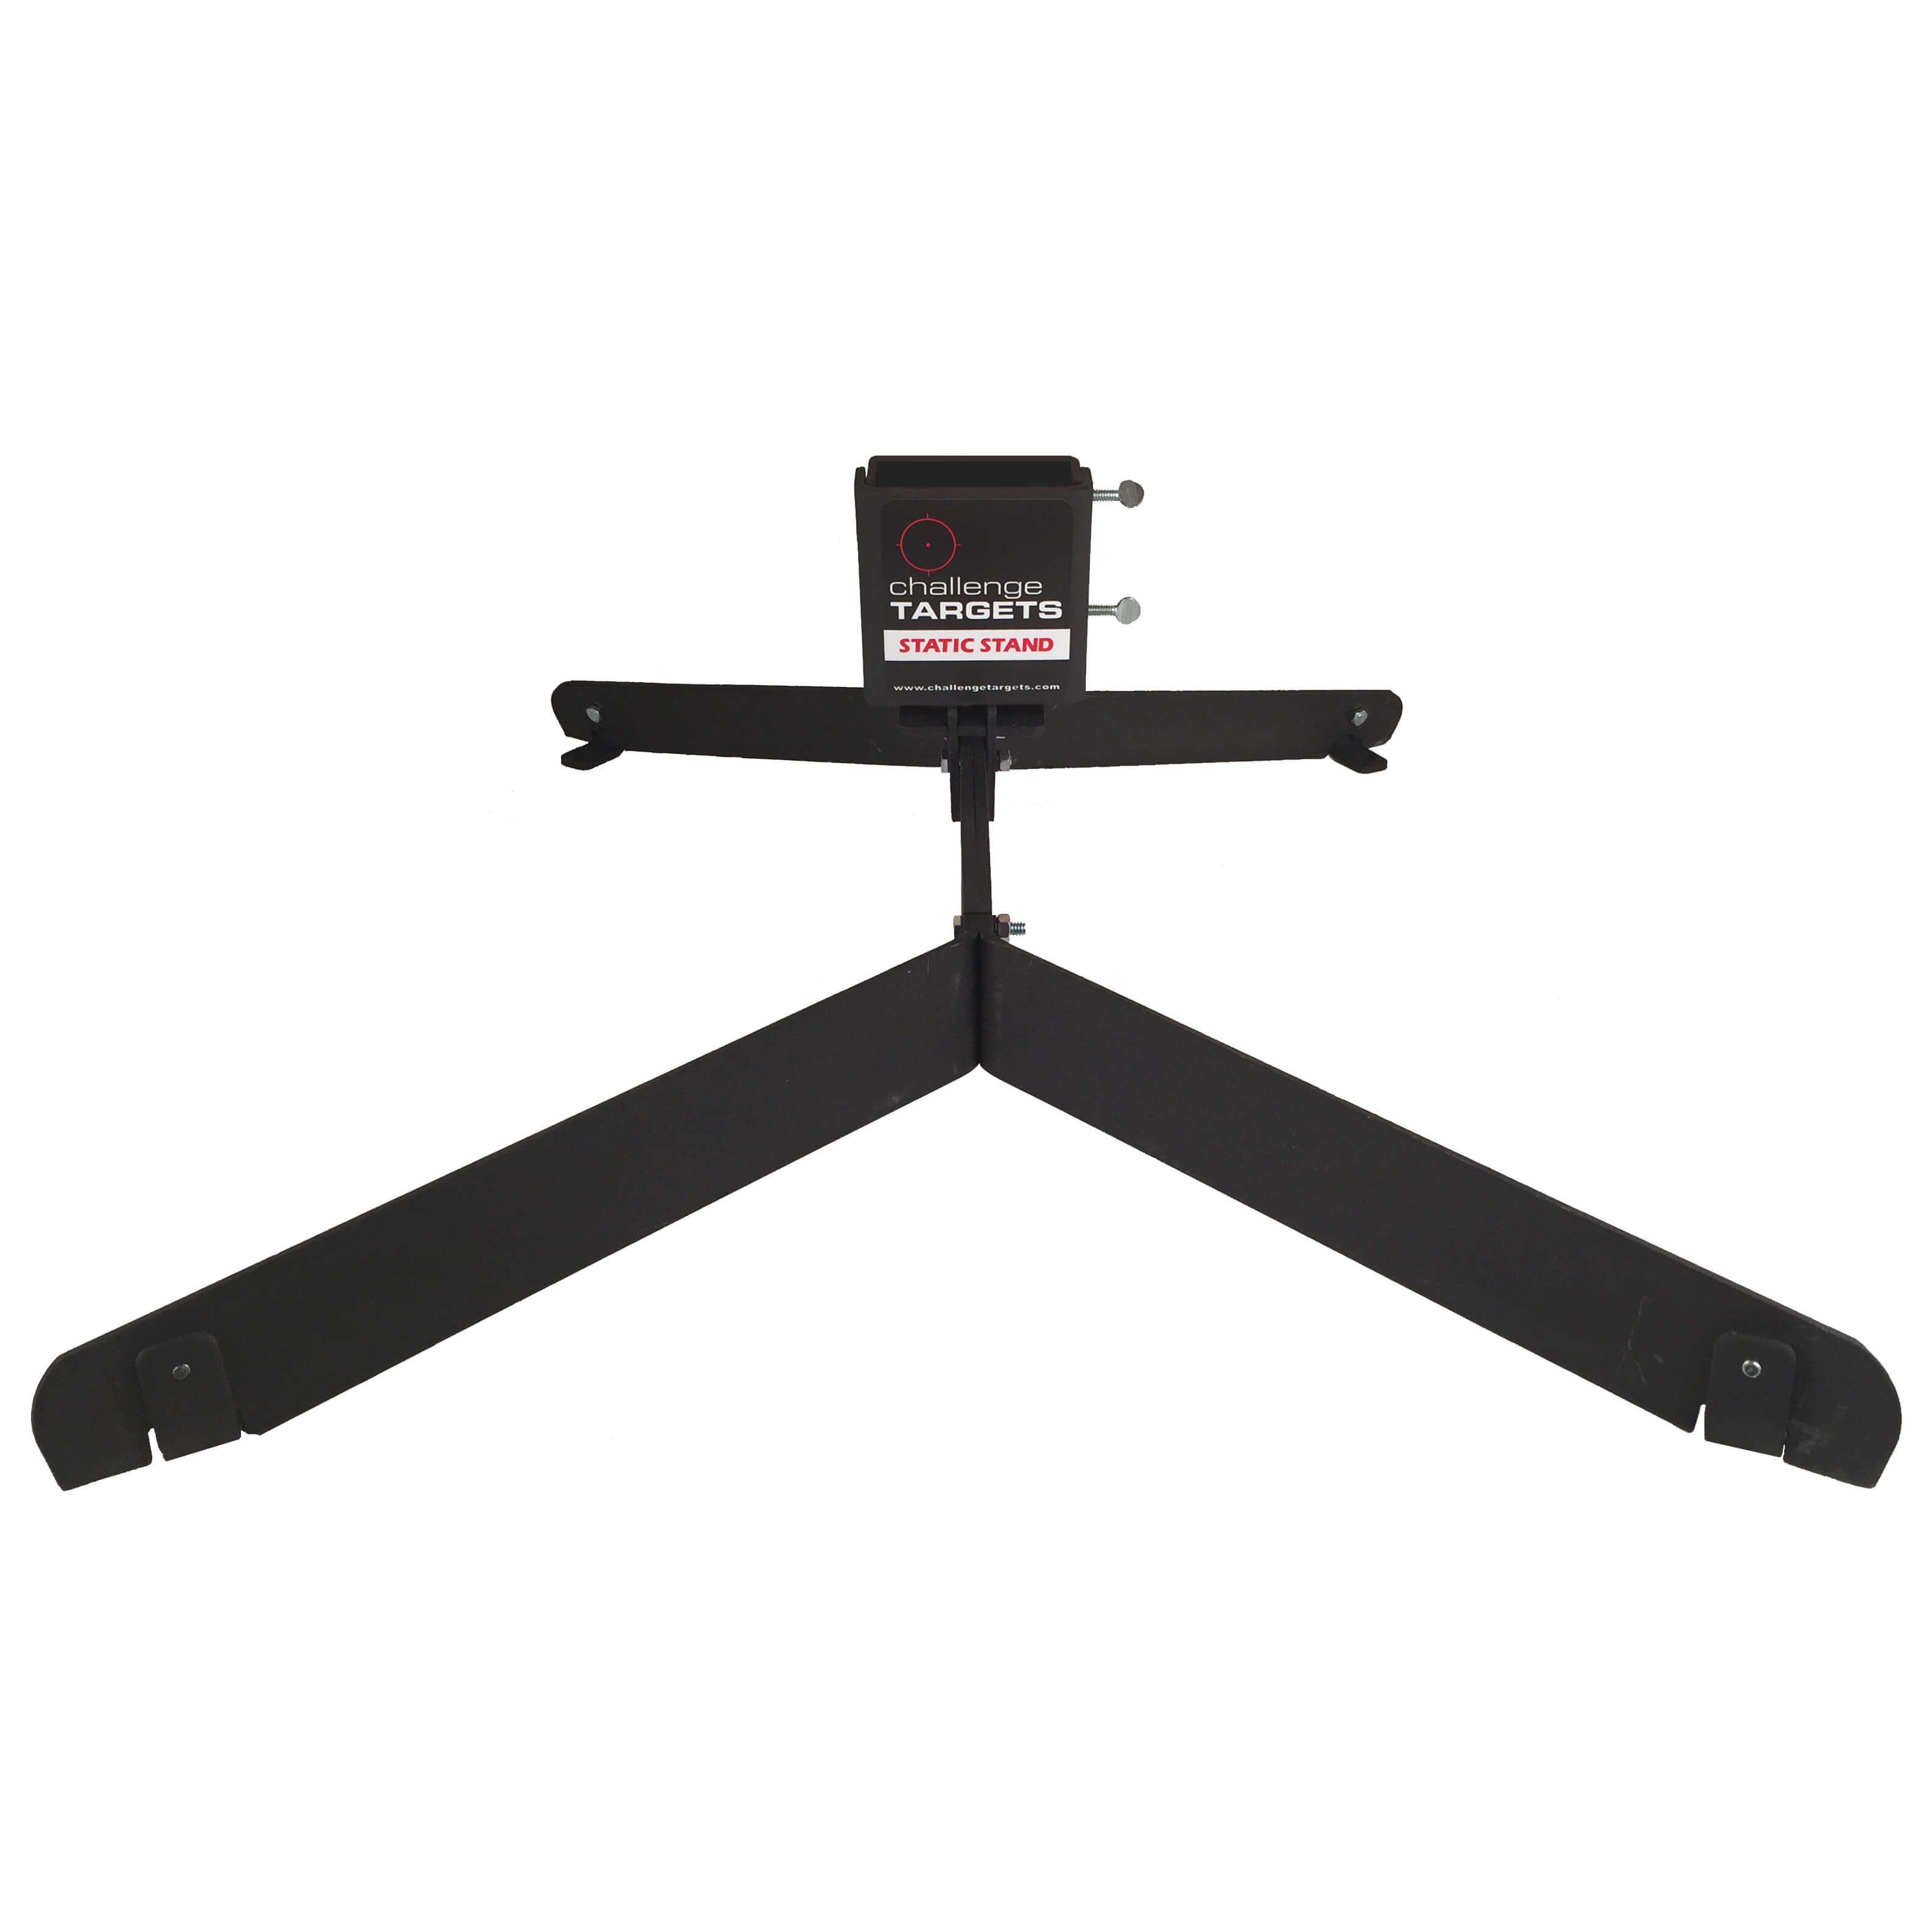 12" Square Rifle Target - Static Stand